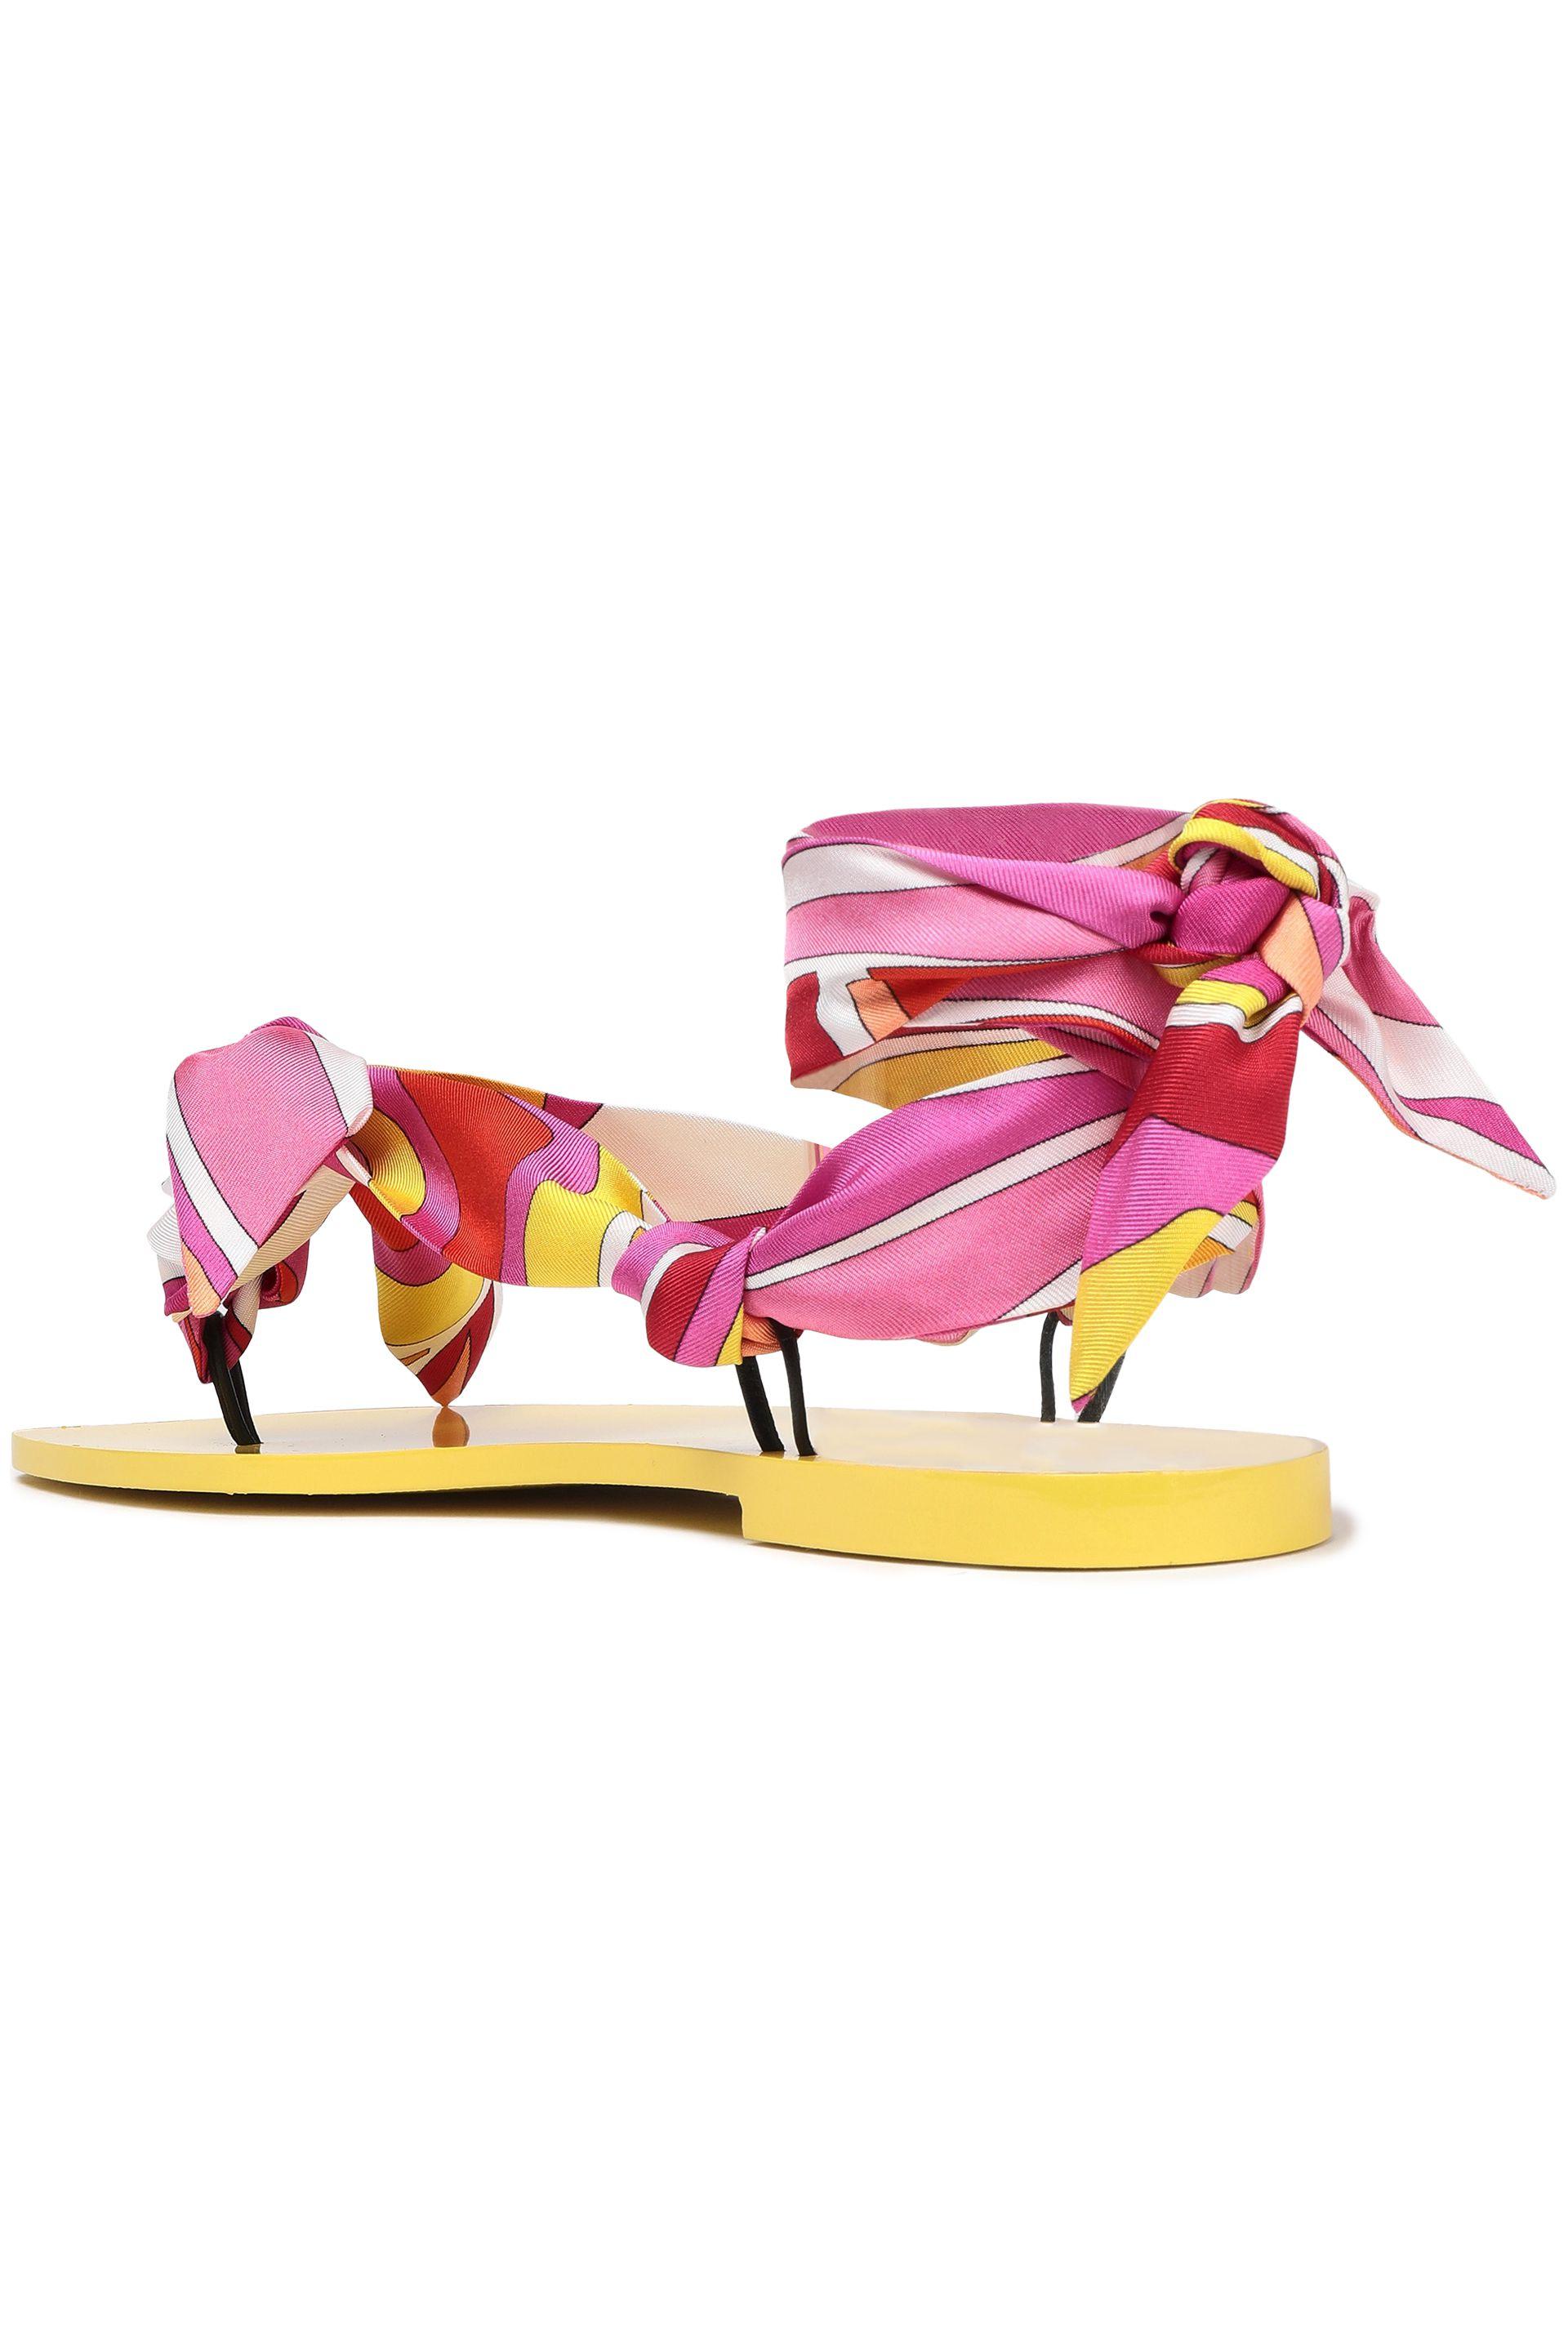 Emilio Pucci Leather Lace-up Printed Twill Flip Flops Yellow in 